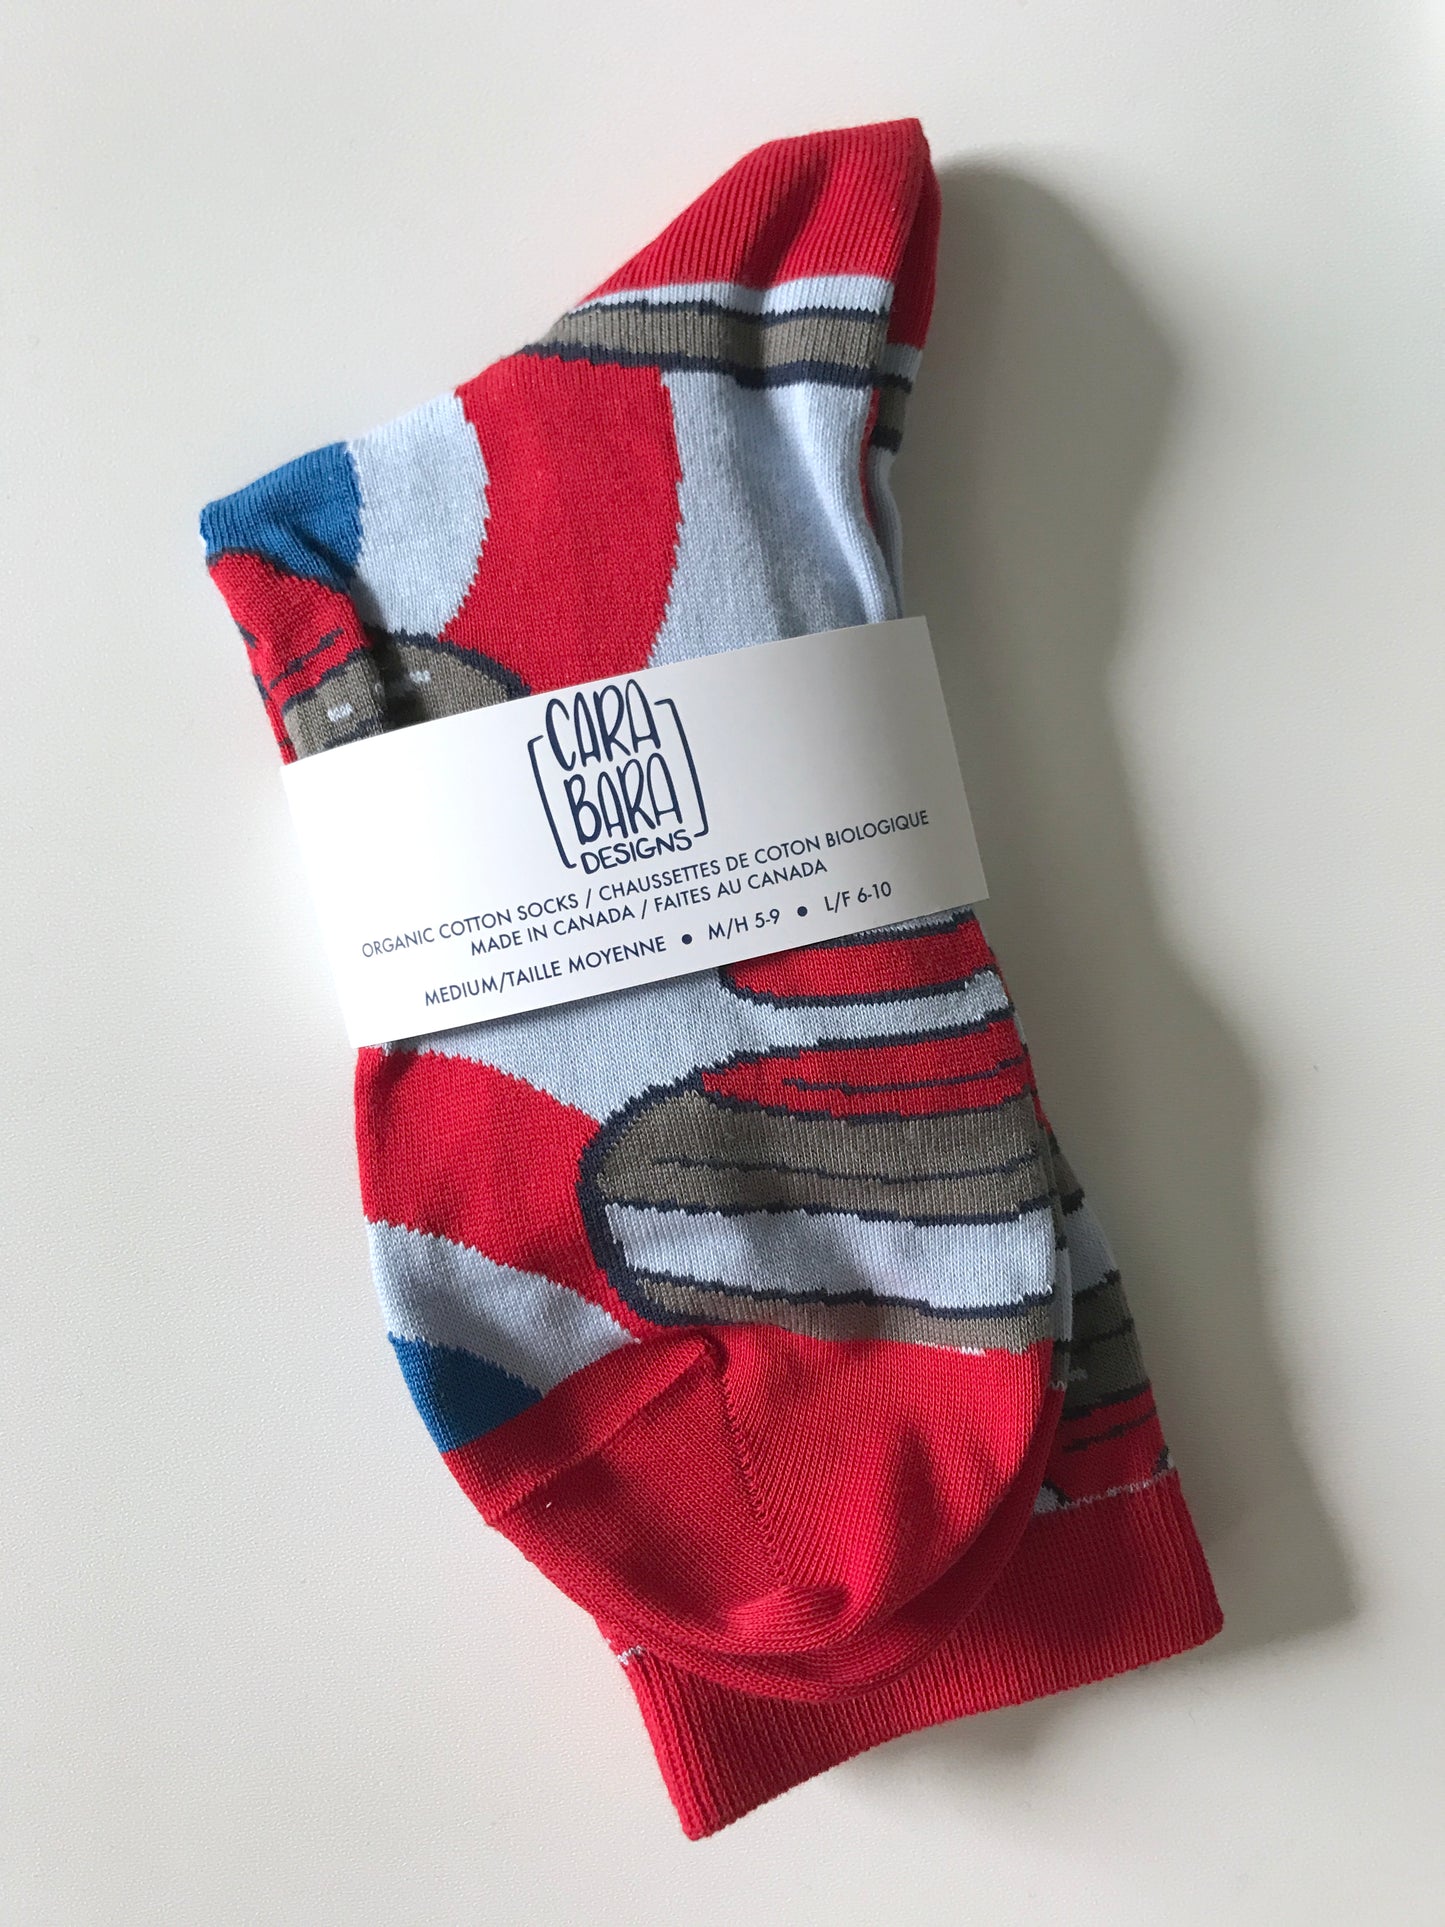 A pair of red and blue socks patterned with curling rocks is folded and labelled with a belly band with the Carabara Designs logo and the words organic cotton socks made in Canada, size medium, in English and French.